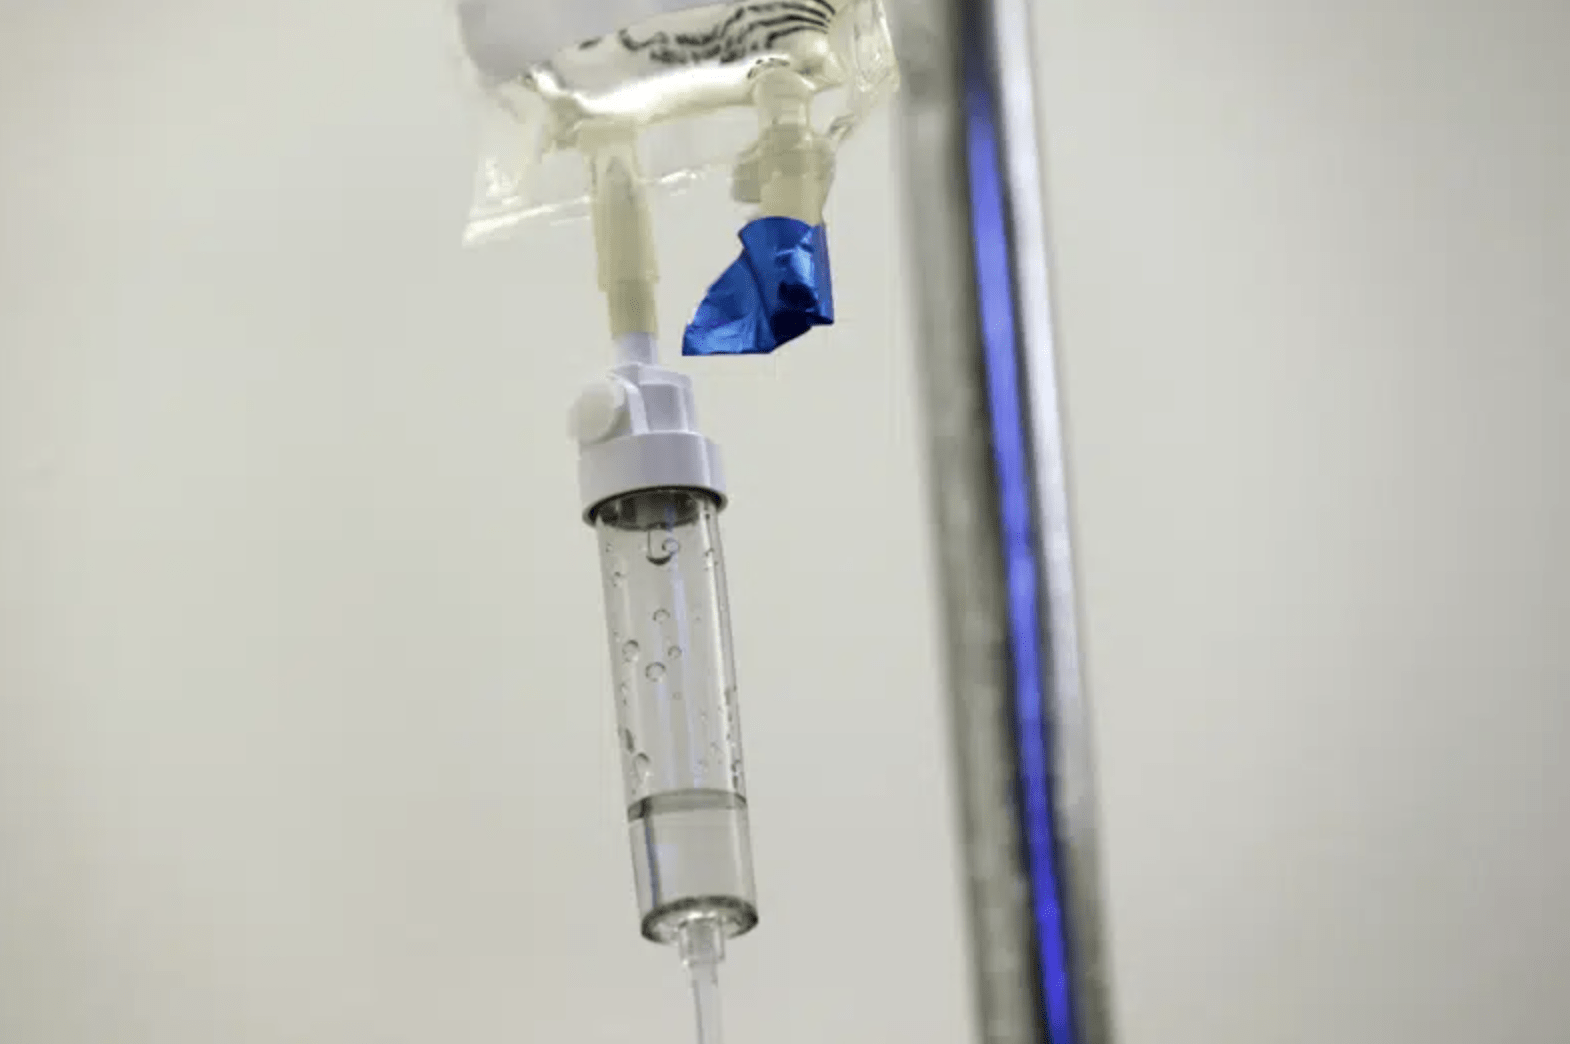 Chemotherapy drugs are administered to a patient at a hospital in Chapel Hill, N.C.